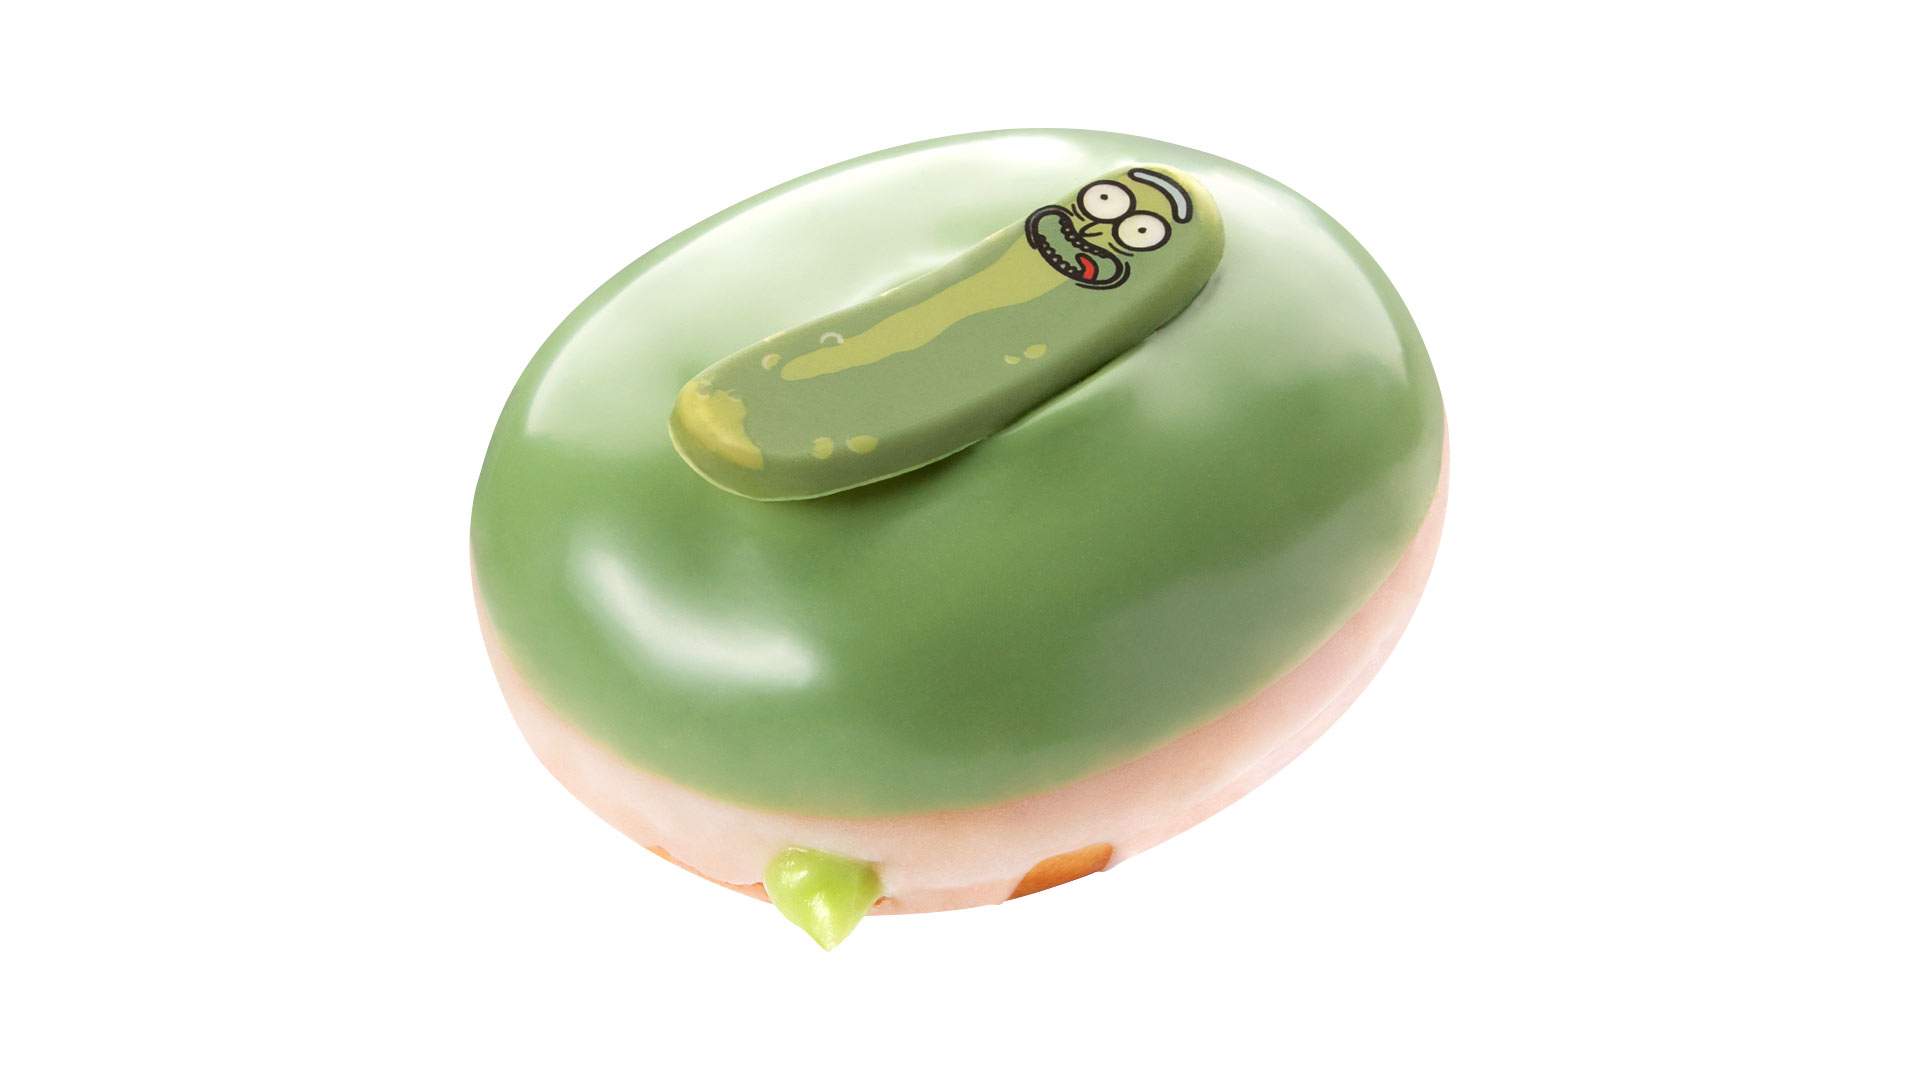 Krispy Kreme Has Just Dropped a Limited-Edition 'Rick and Morty'-Themed Pickle Rick Doughnut